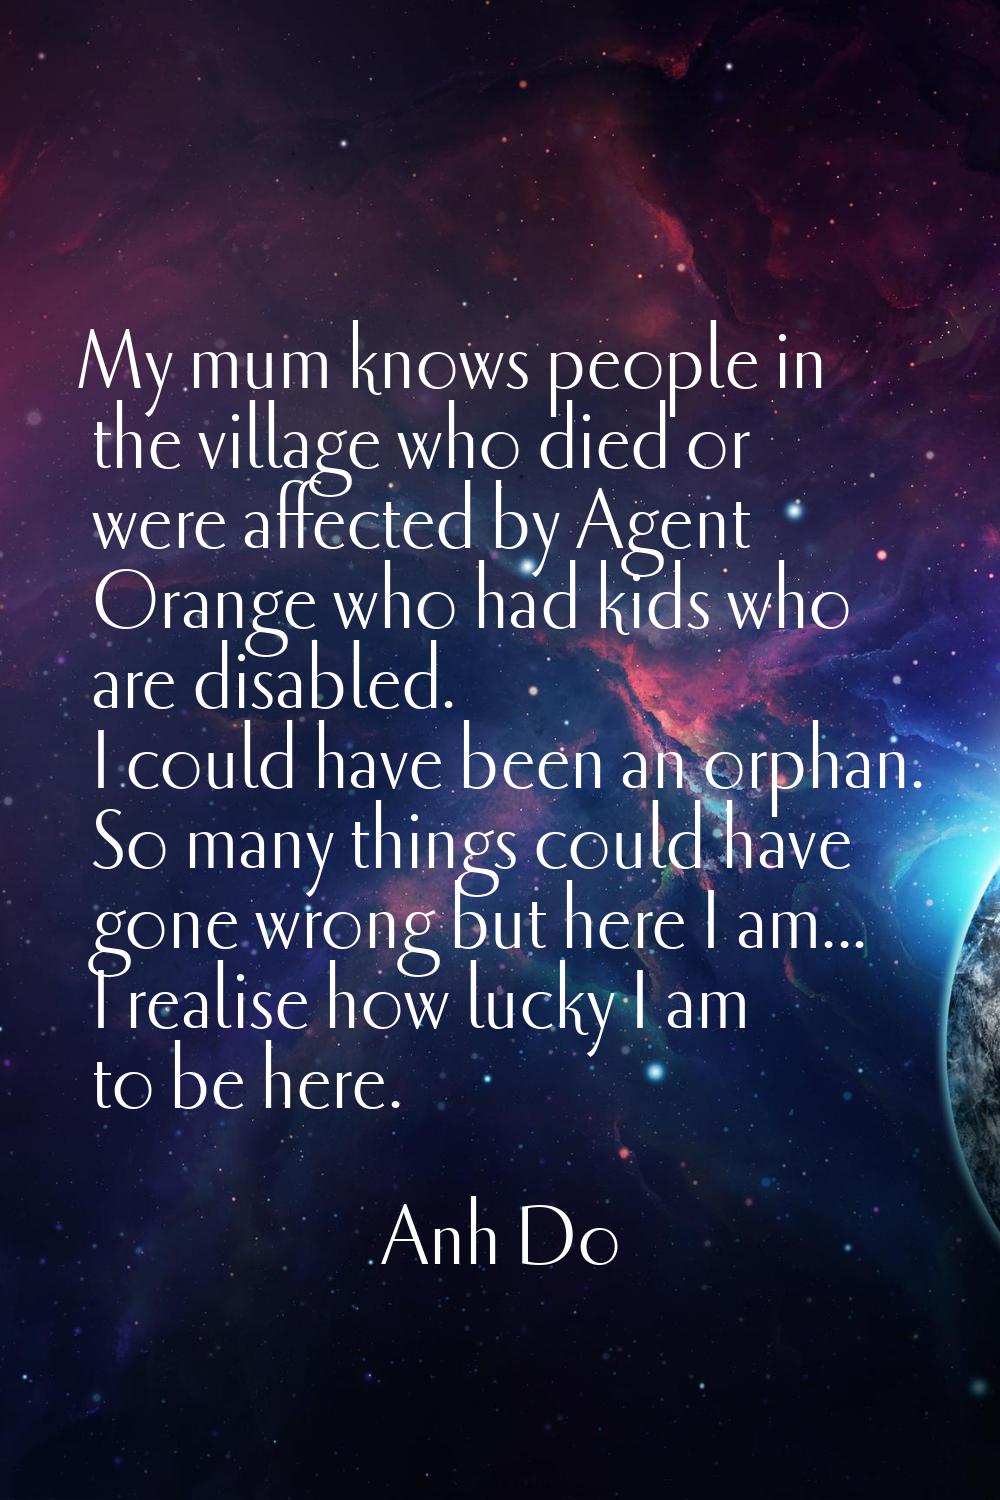 My mum knows people in the village who died or were affected by Agent Orange who had kids who are d